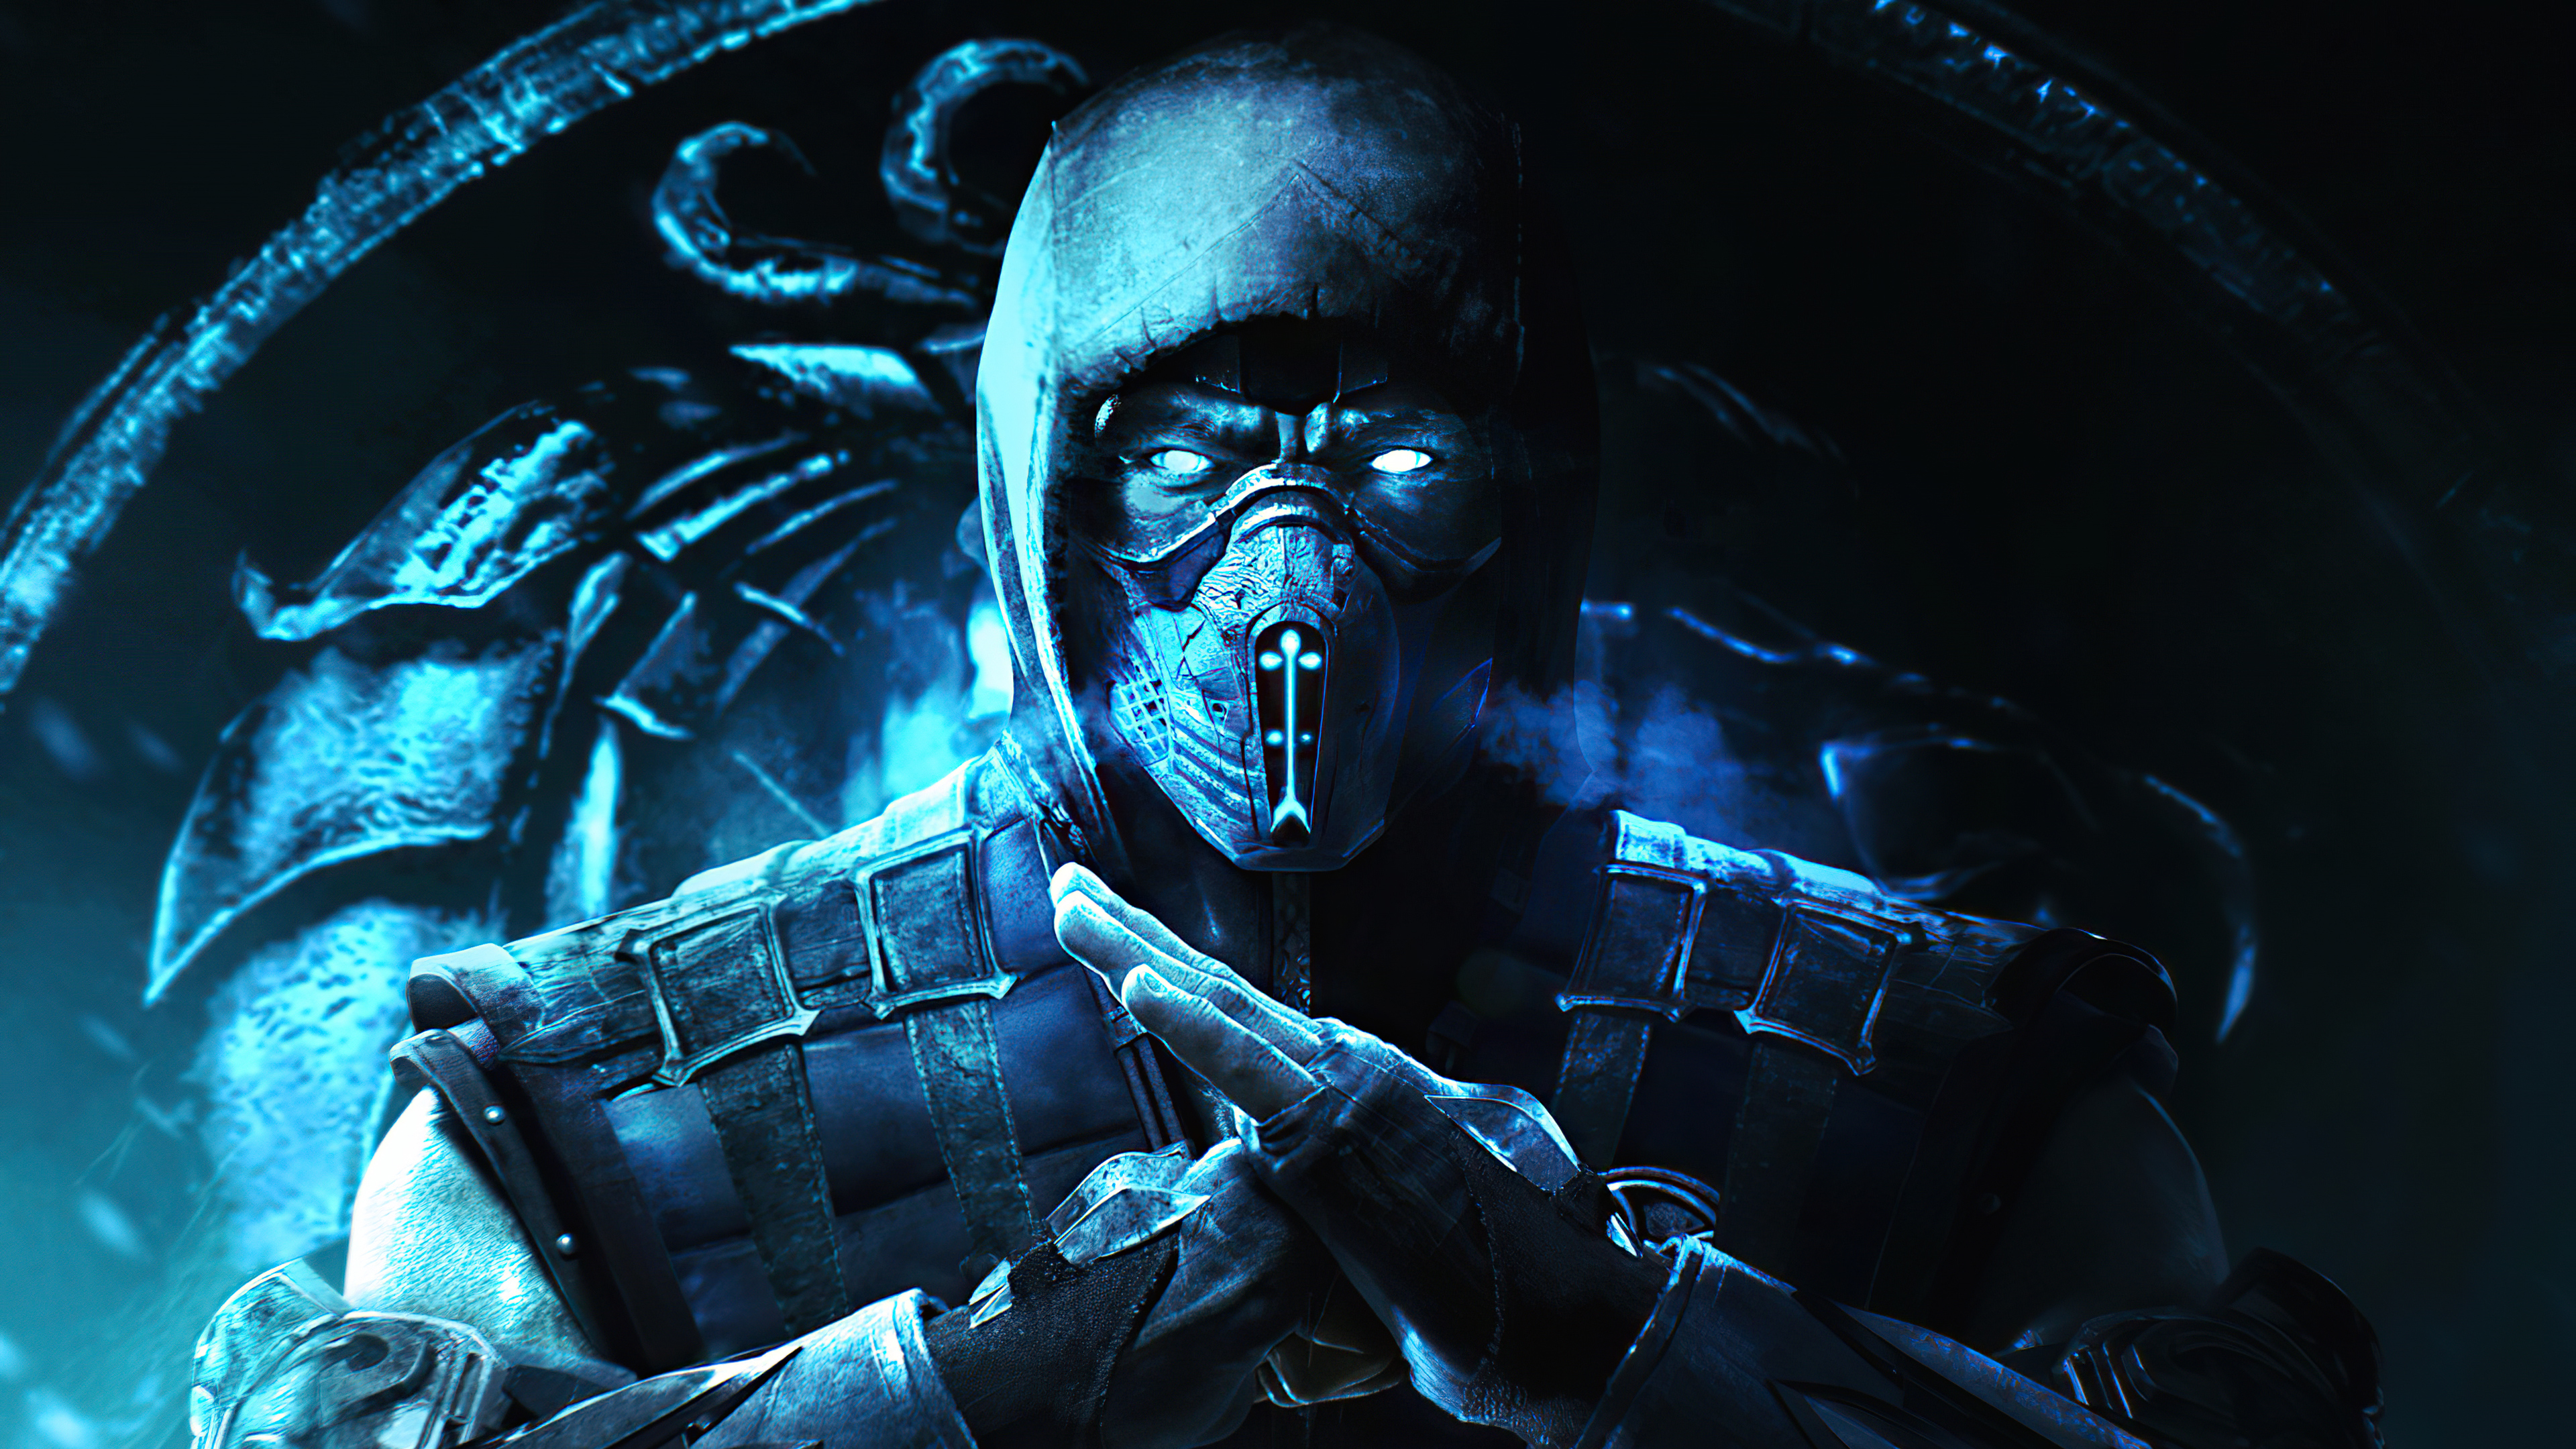 3840x2160 1920x1080 Sub Zero Mortal Kombat 4k 2020 Laptop Full HD 1080P HD 4k Wallpapers, Images, Backgrounds, Photos and Pictures